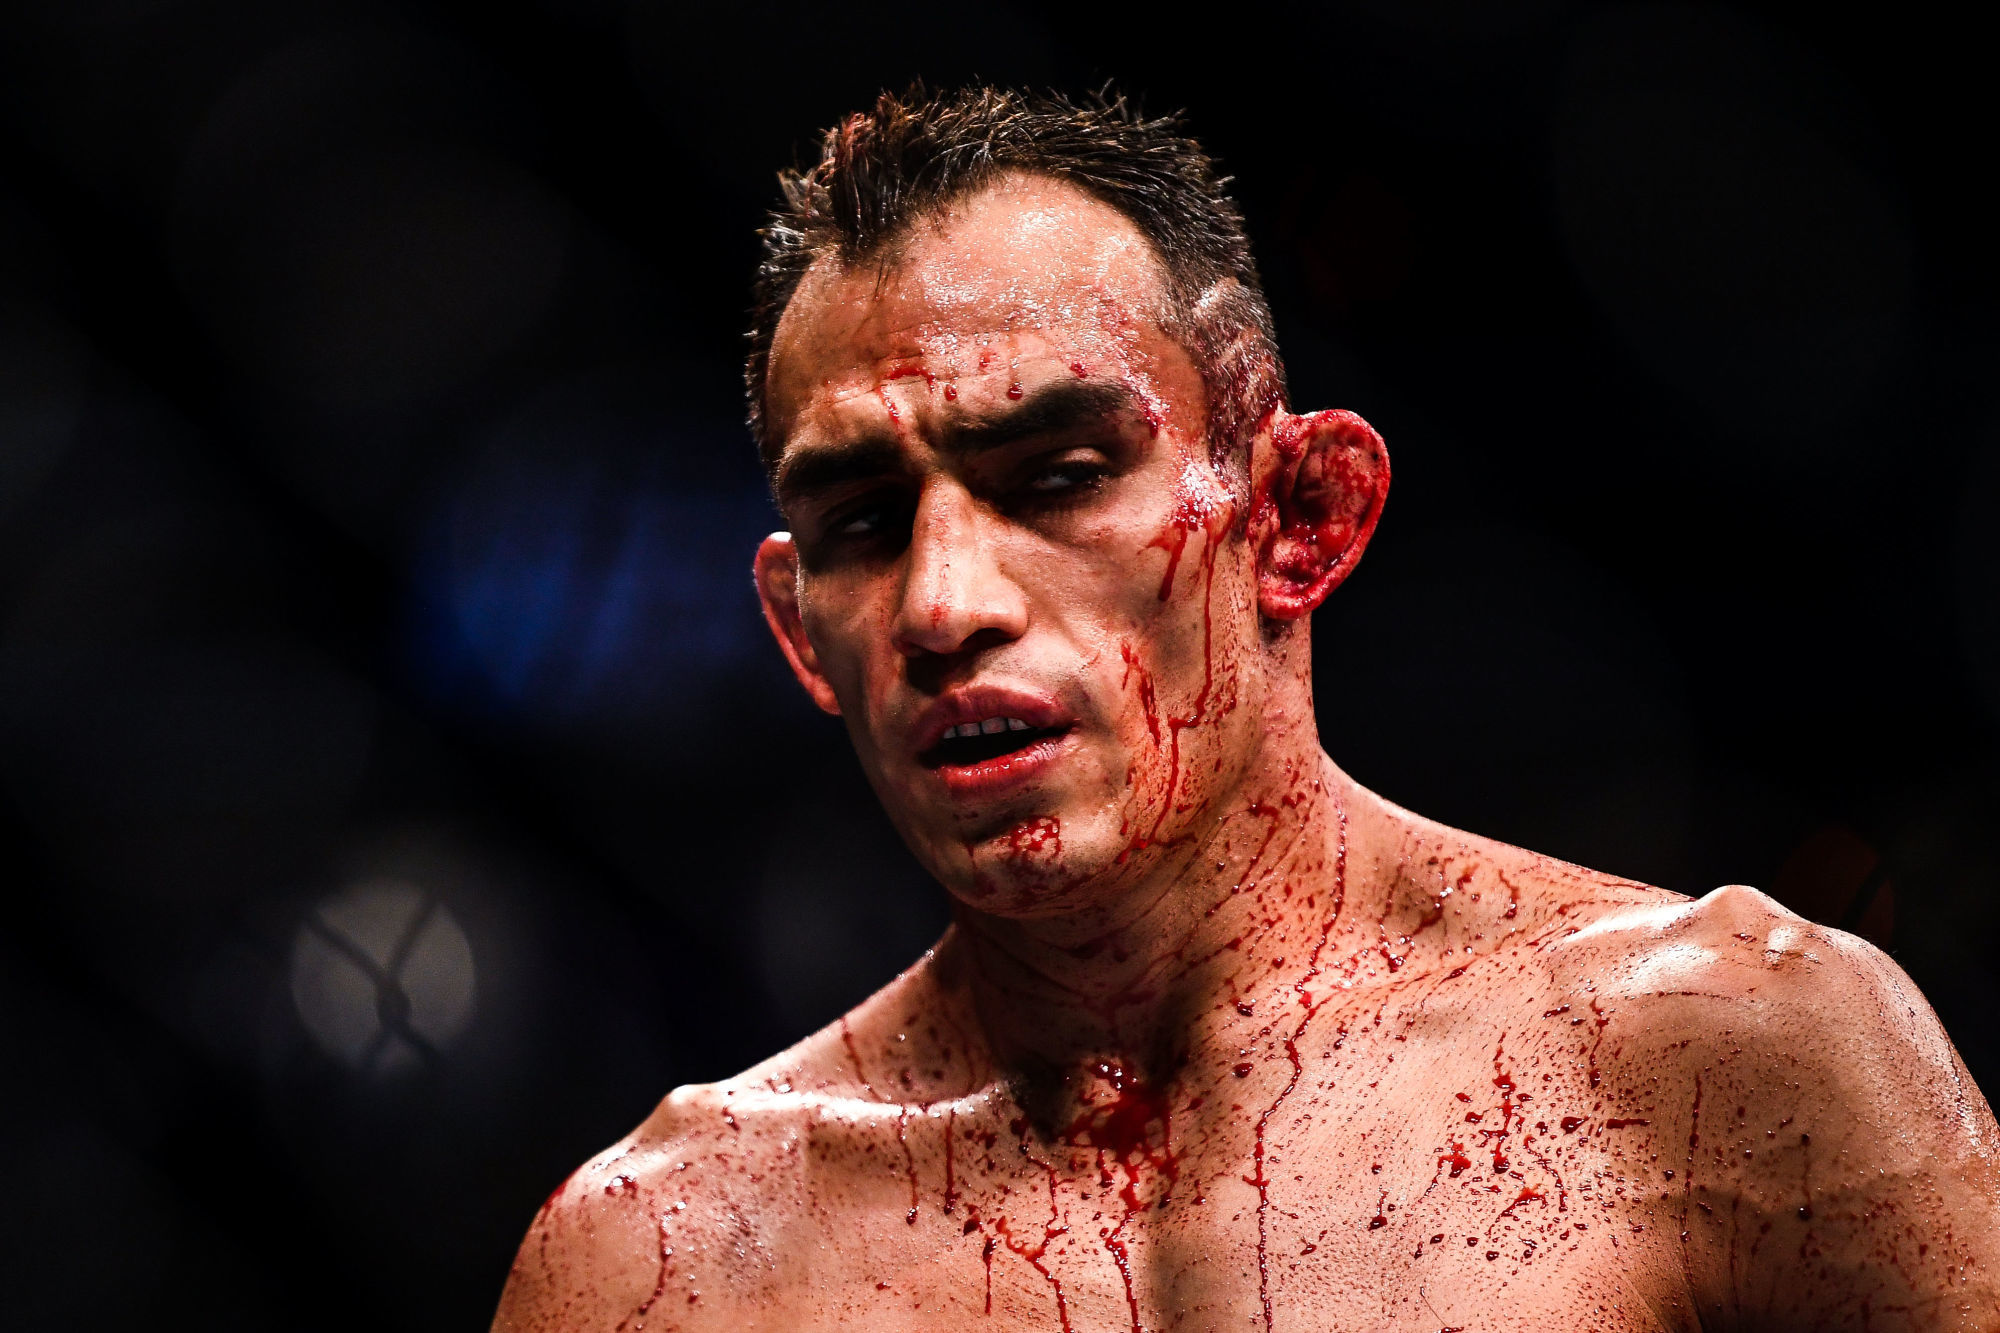 6 October 2018; Tony Ferguson during their UFC lightweight fight against Anthony Pettis during UFC 229 at T-Mobile Arena in Las Vegas, Nevada, USA. Photo by Stephen McCarthy/Sportsfile / Icon Sport